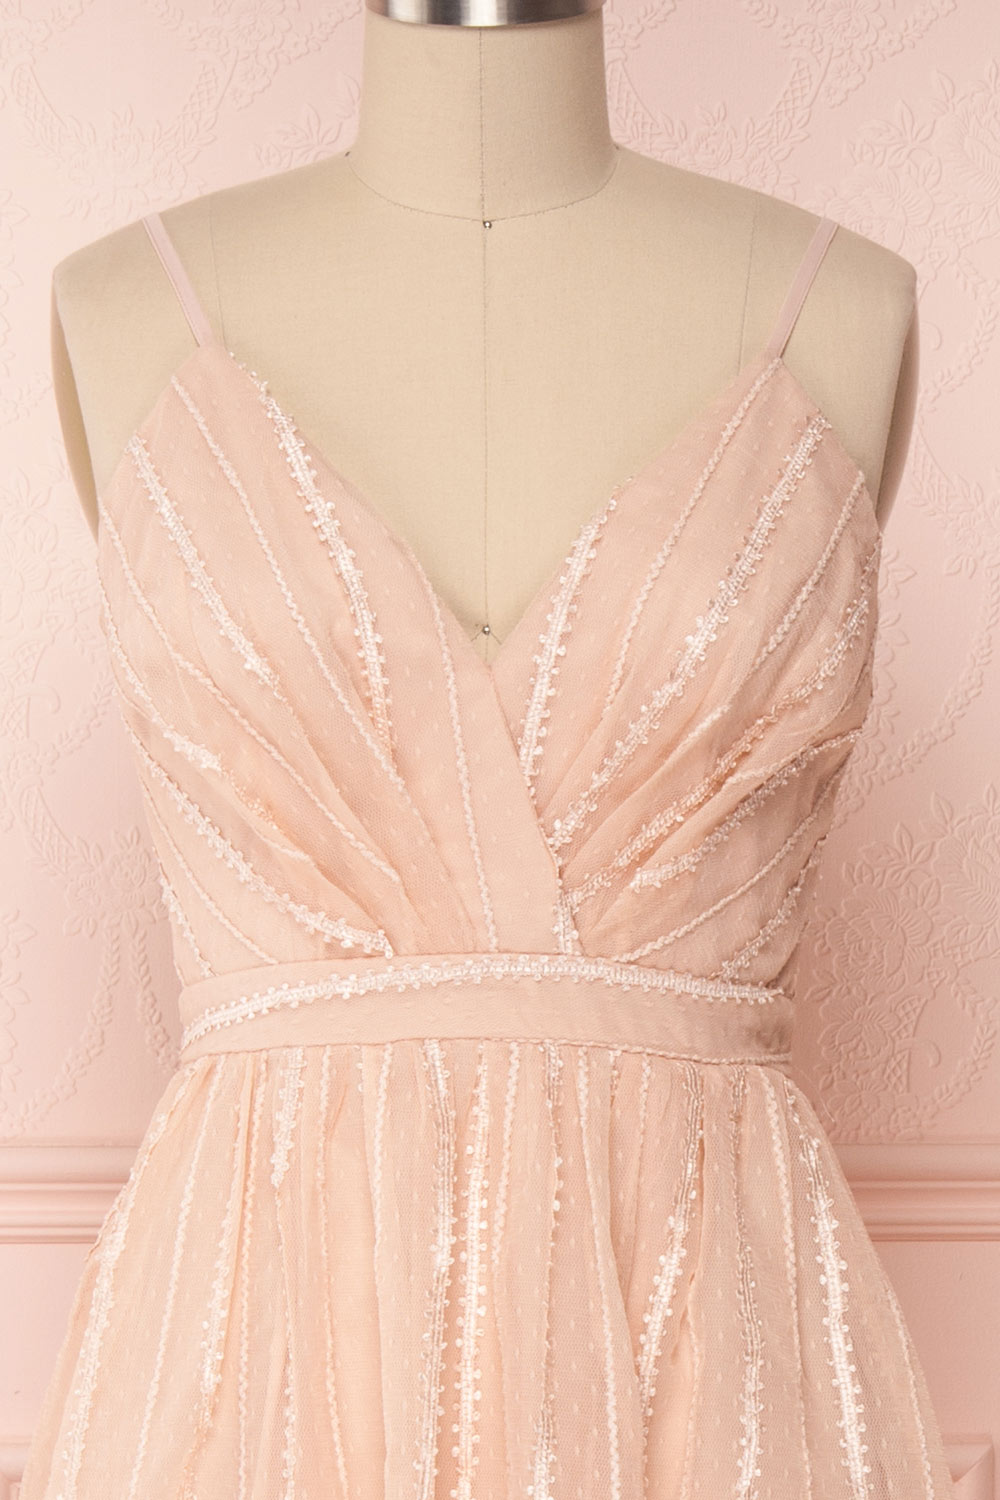 Aegis Lychee Pink Striped Mesh A-Line Gown | Boutique 1861 2